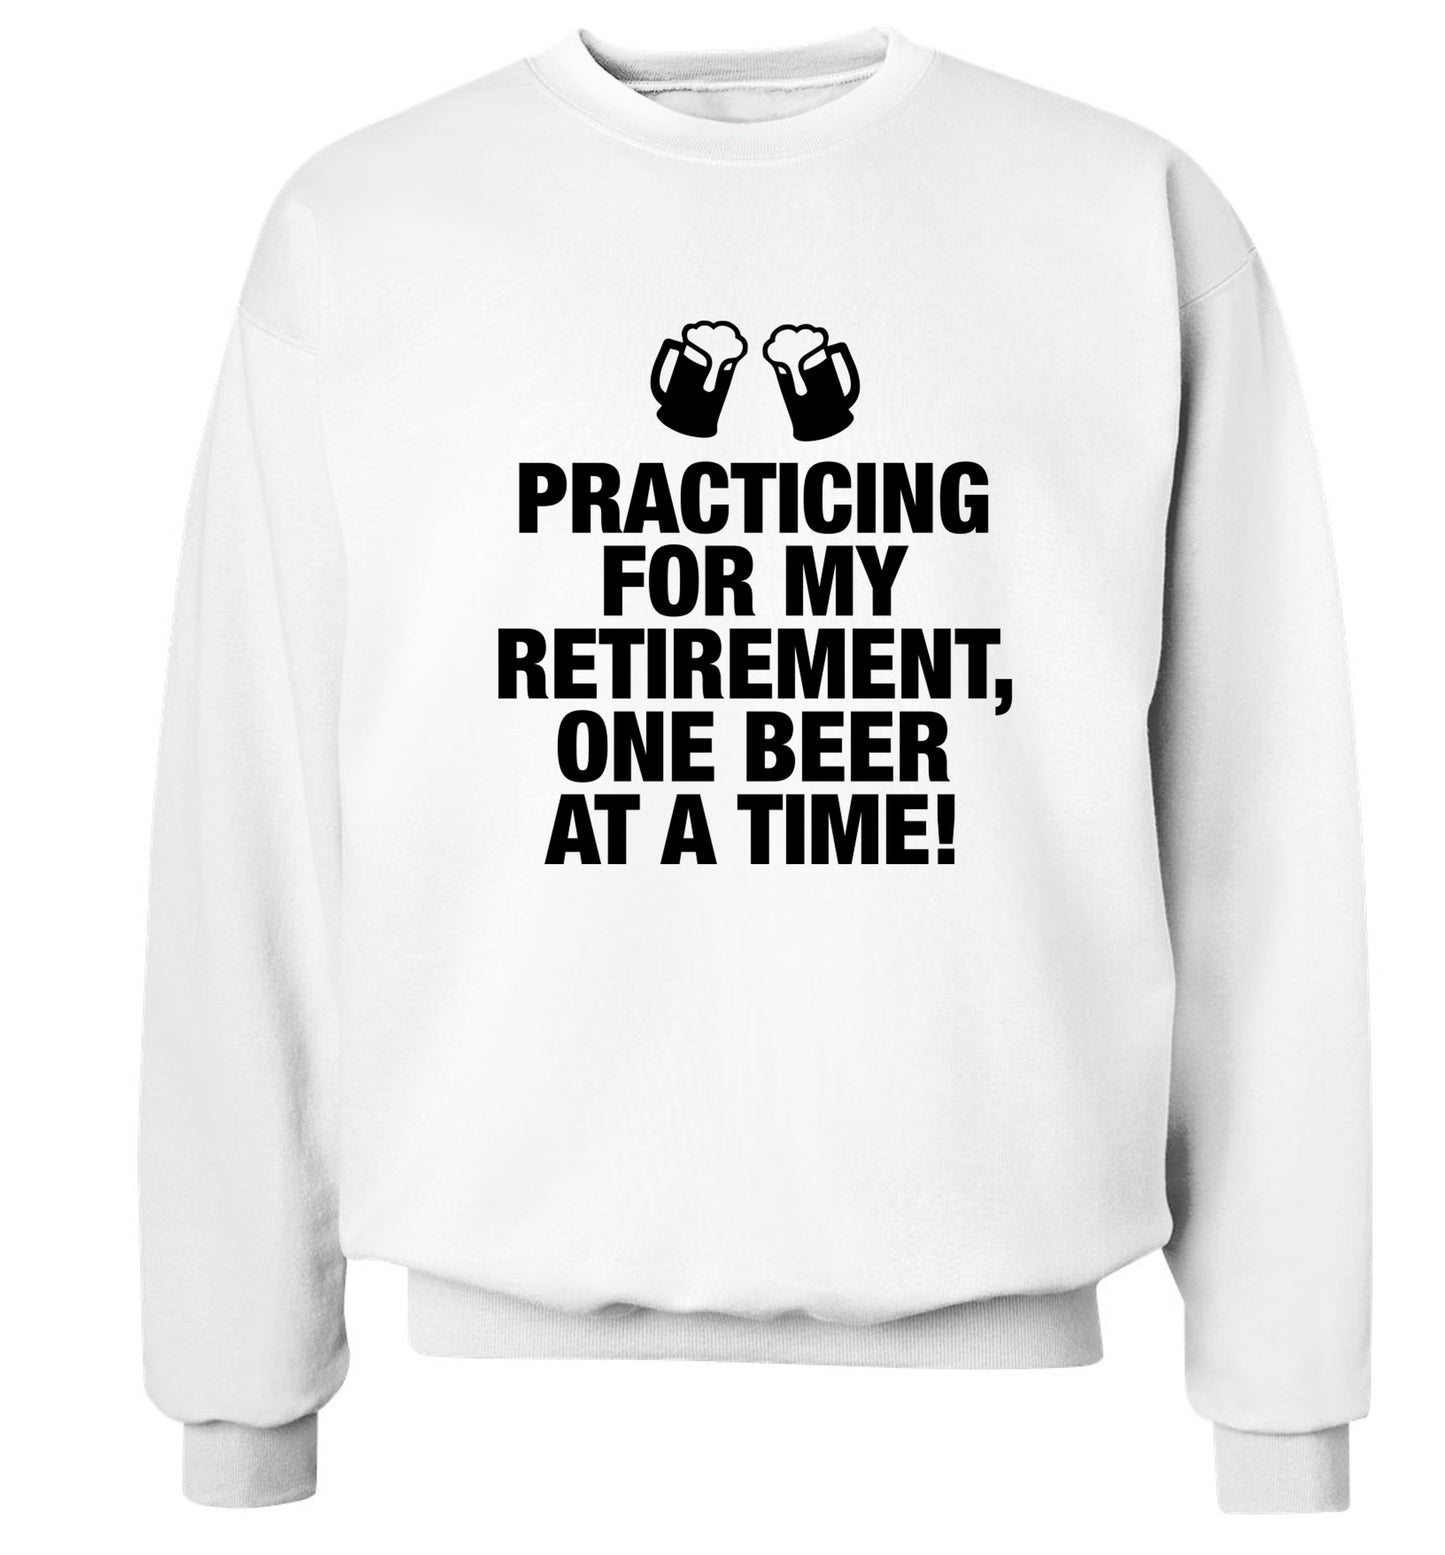 Practicing my retirement one beer at a time Adult's unisex white Sweater 2XL